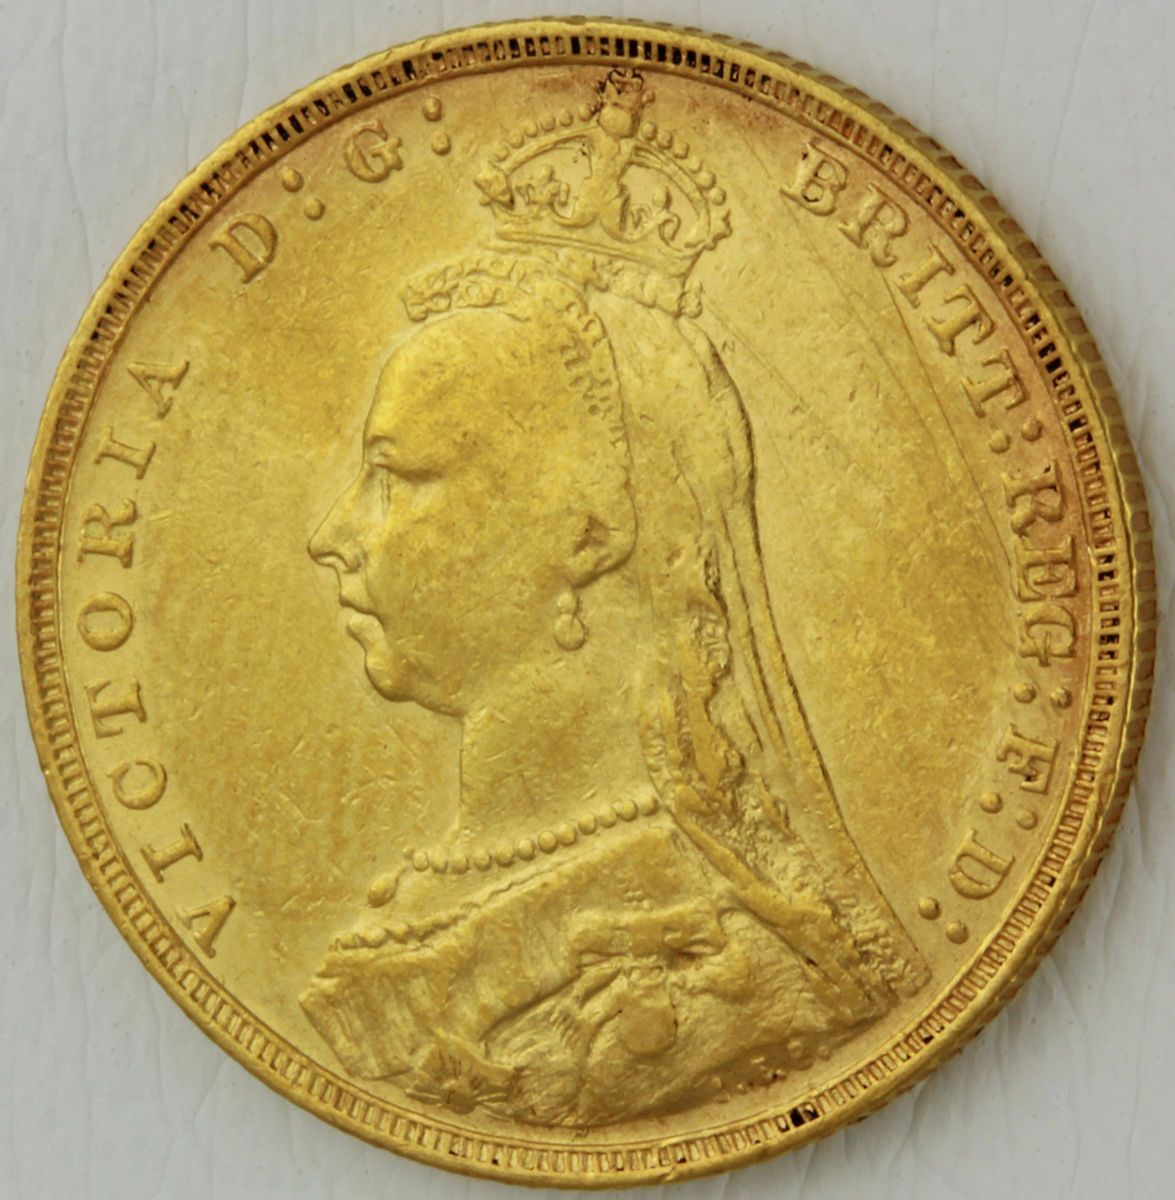  Victoria Jubilee Head 1891 London Mint Full Gold Sovereign Coin